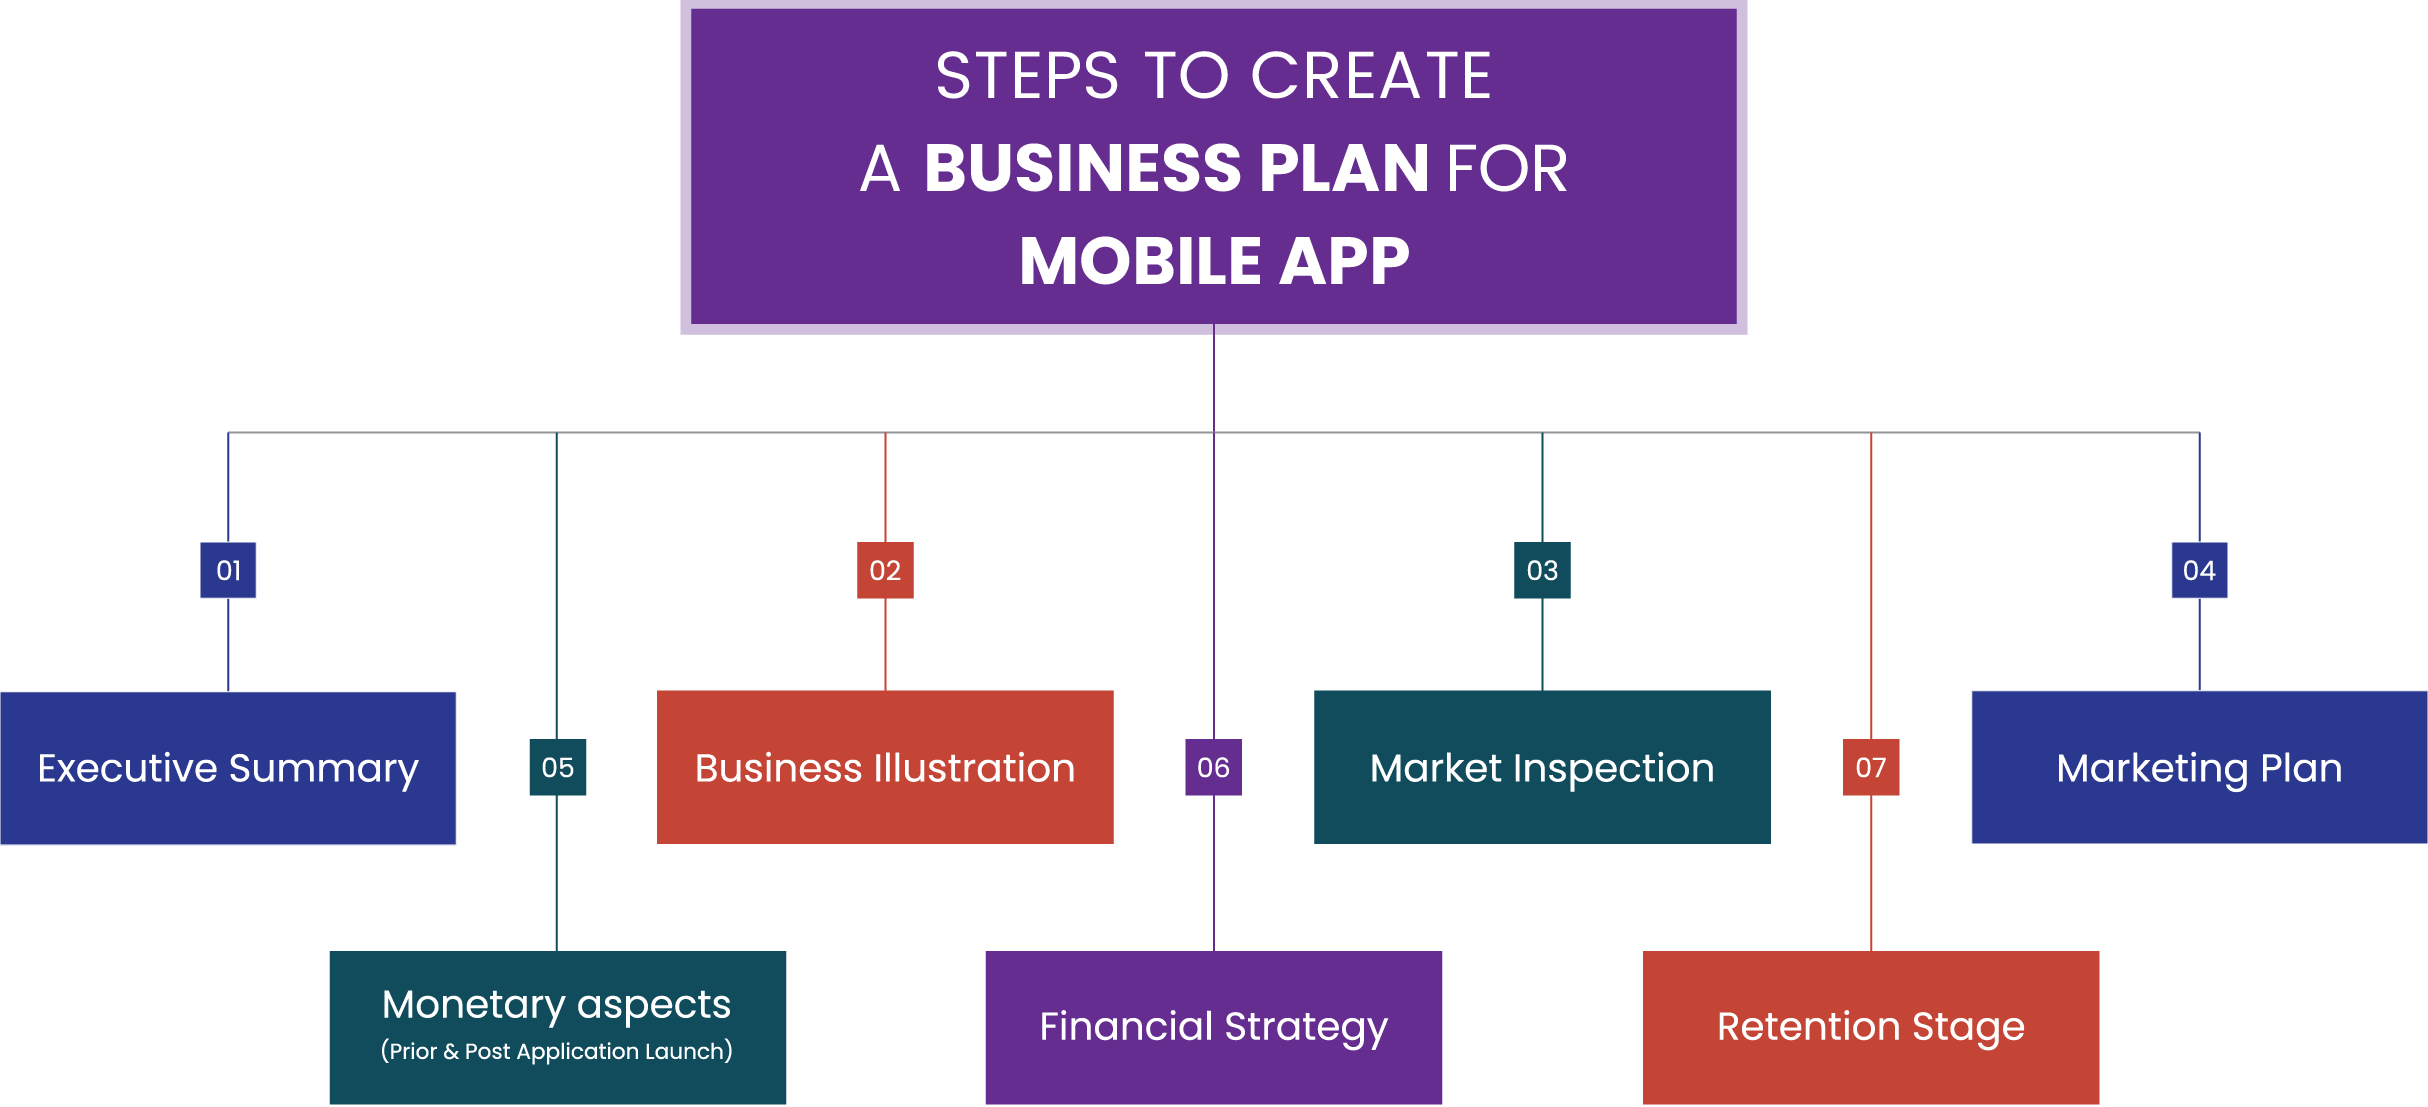 Steps to create a mobile app business plan